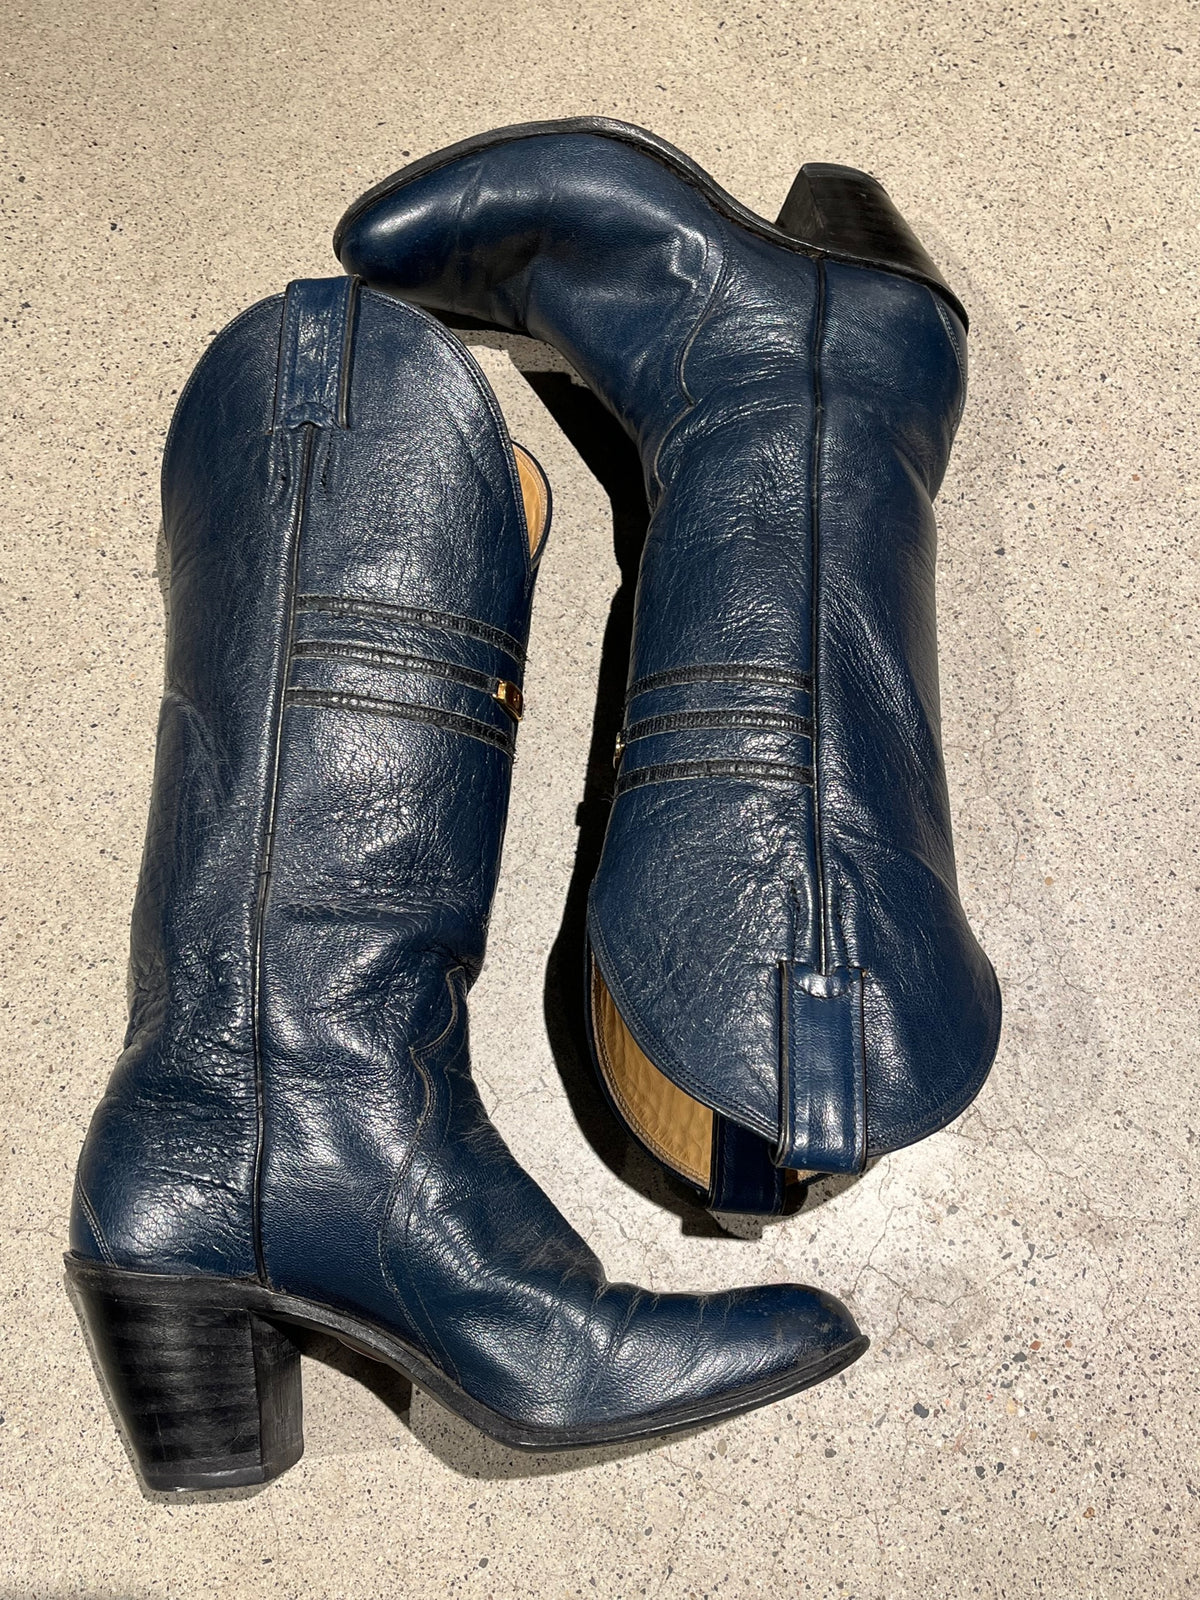 Vintage Navy Boot with Horseshoe